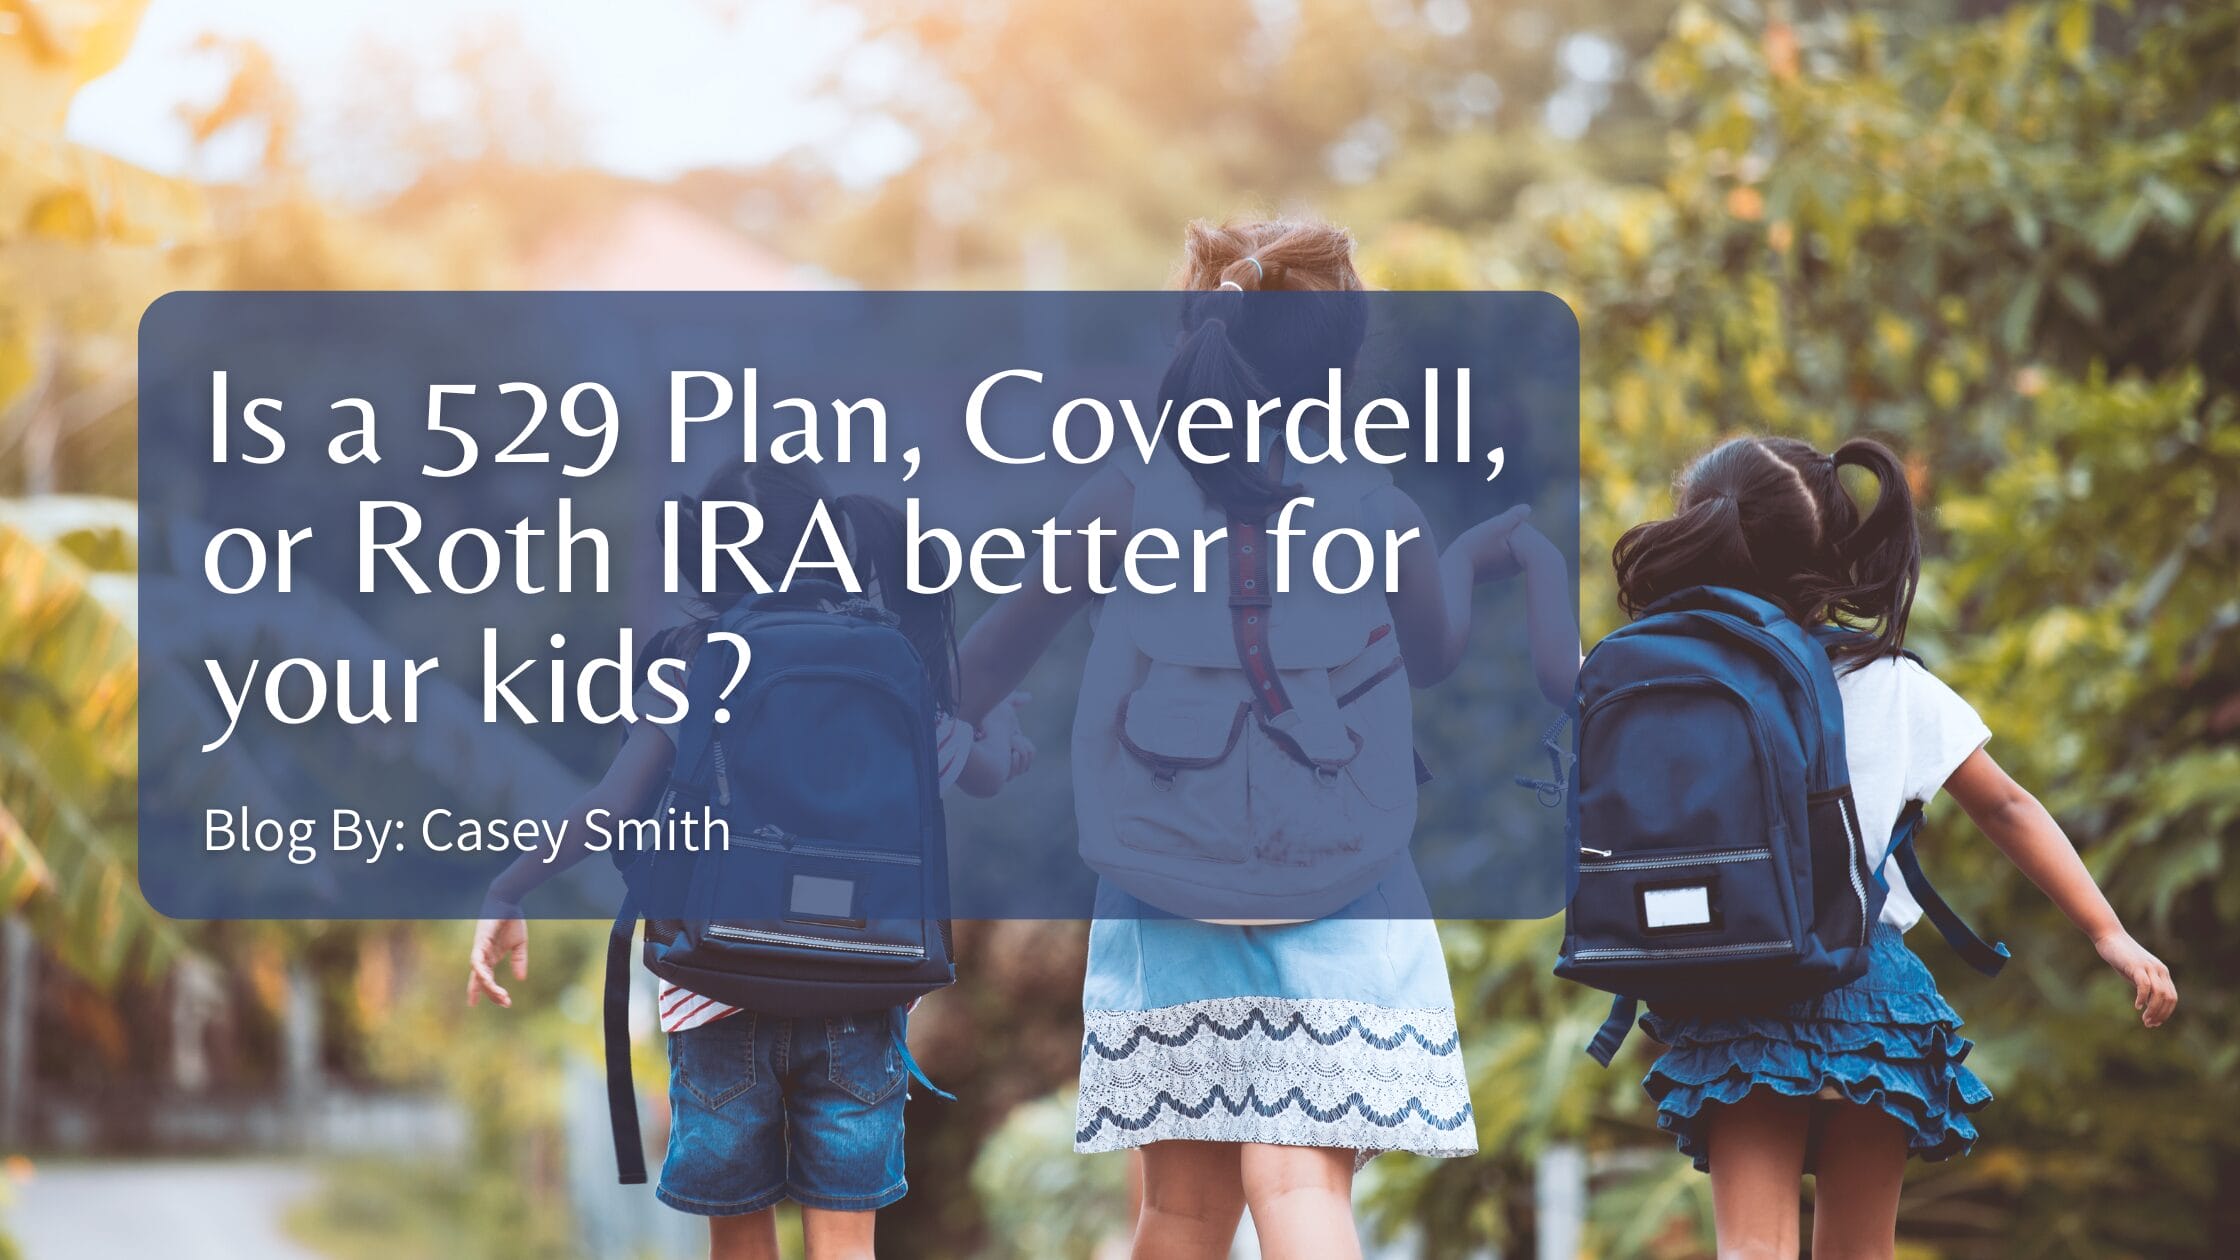 Is a 529 Plan, Coverdell, or Roth IRA better for your kids?